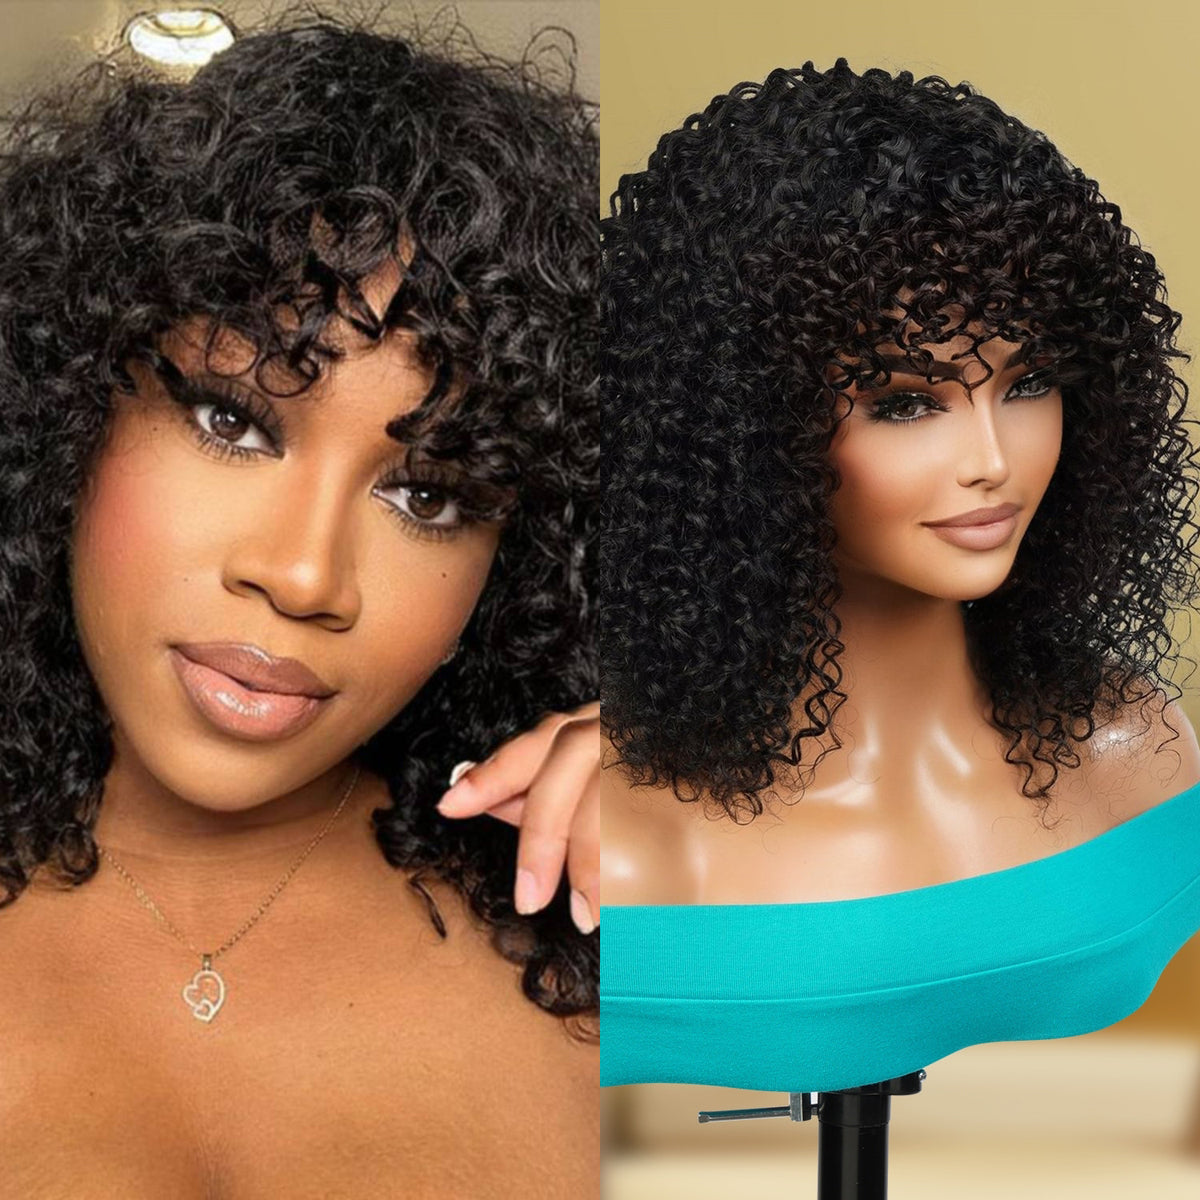 UpScale 100% Human Hair Wear and Go Short Curly Bob with Bang 16"